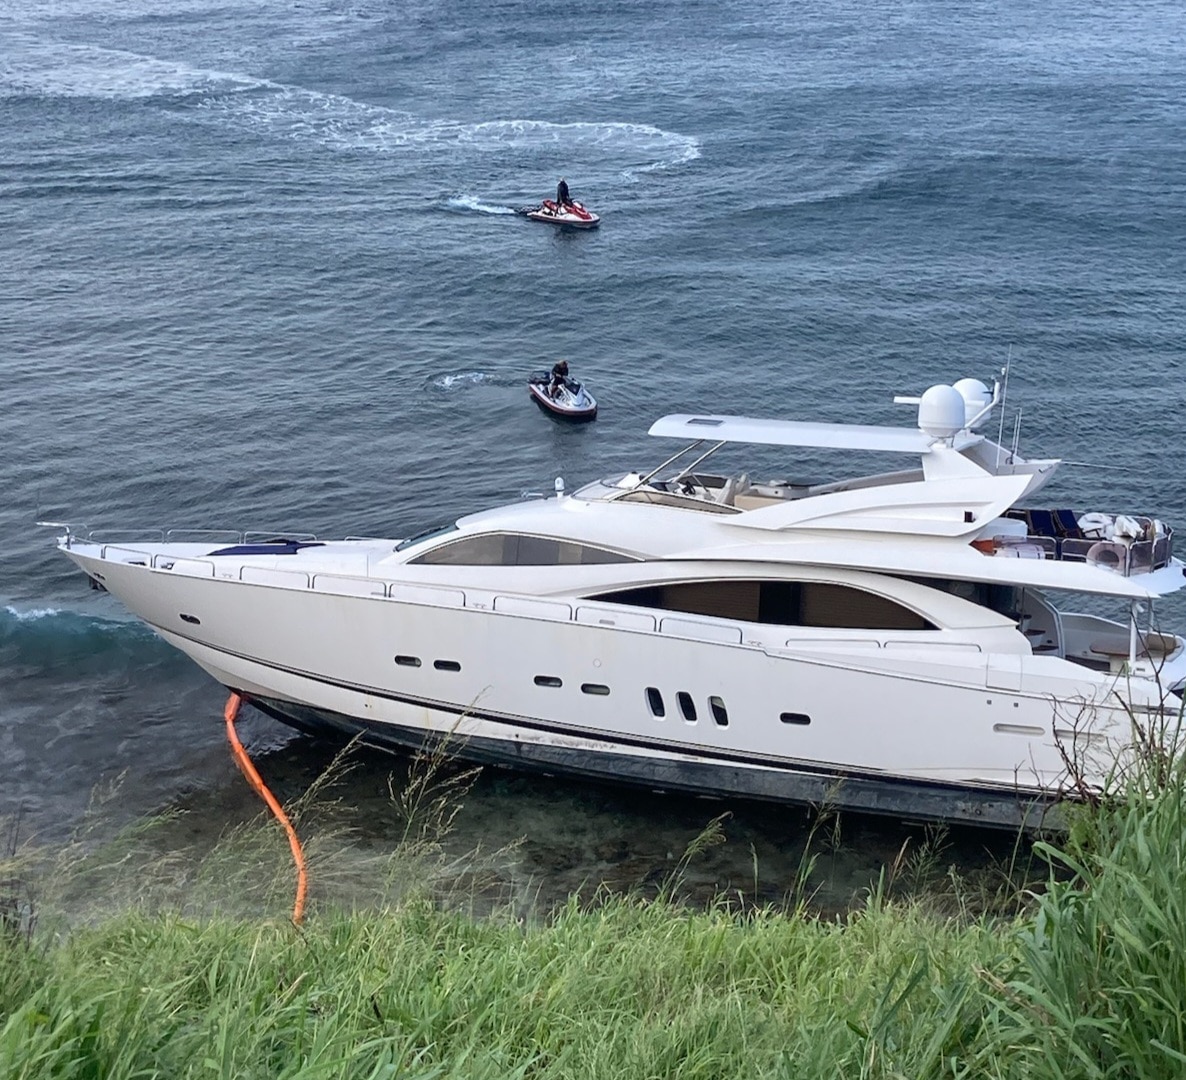 The Coast Guard is responding to a 94-foot motor yacht that grounded off the north side of Honolua Bay, Maui, Monday.